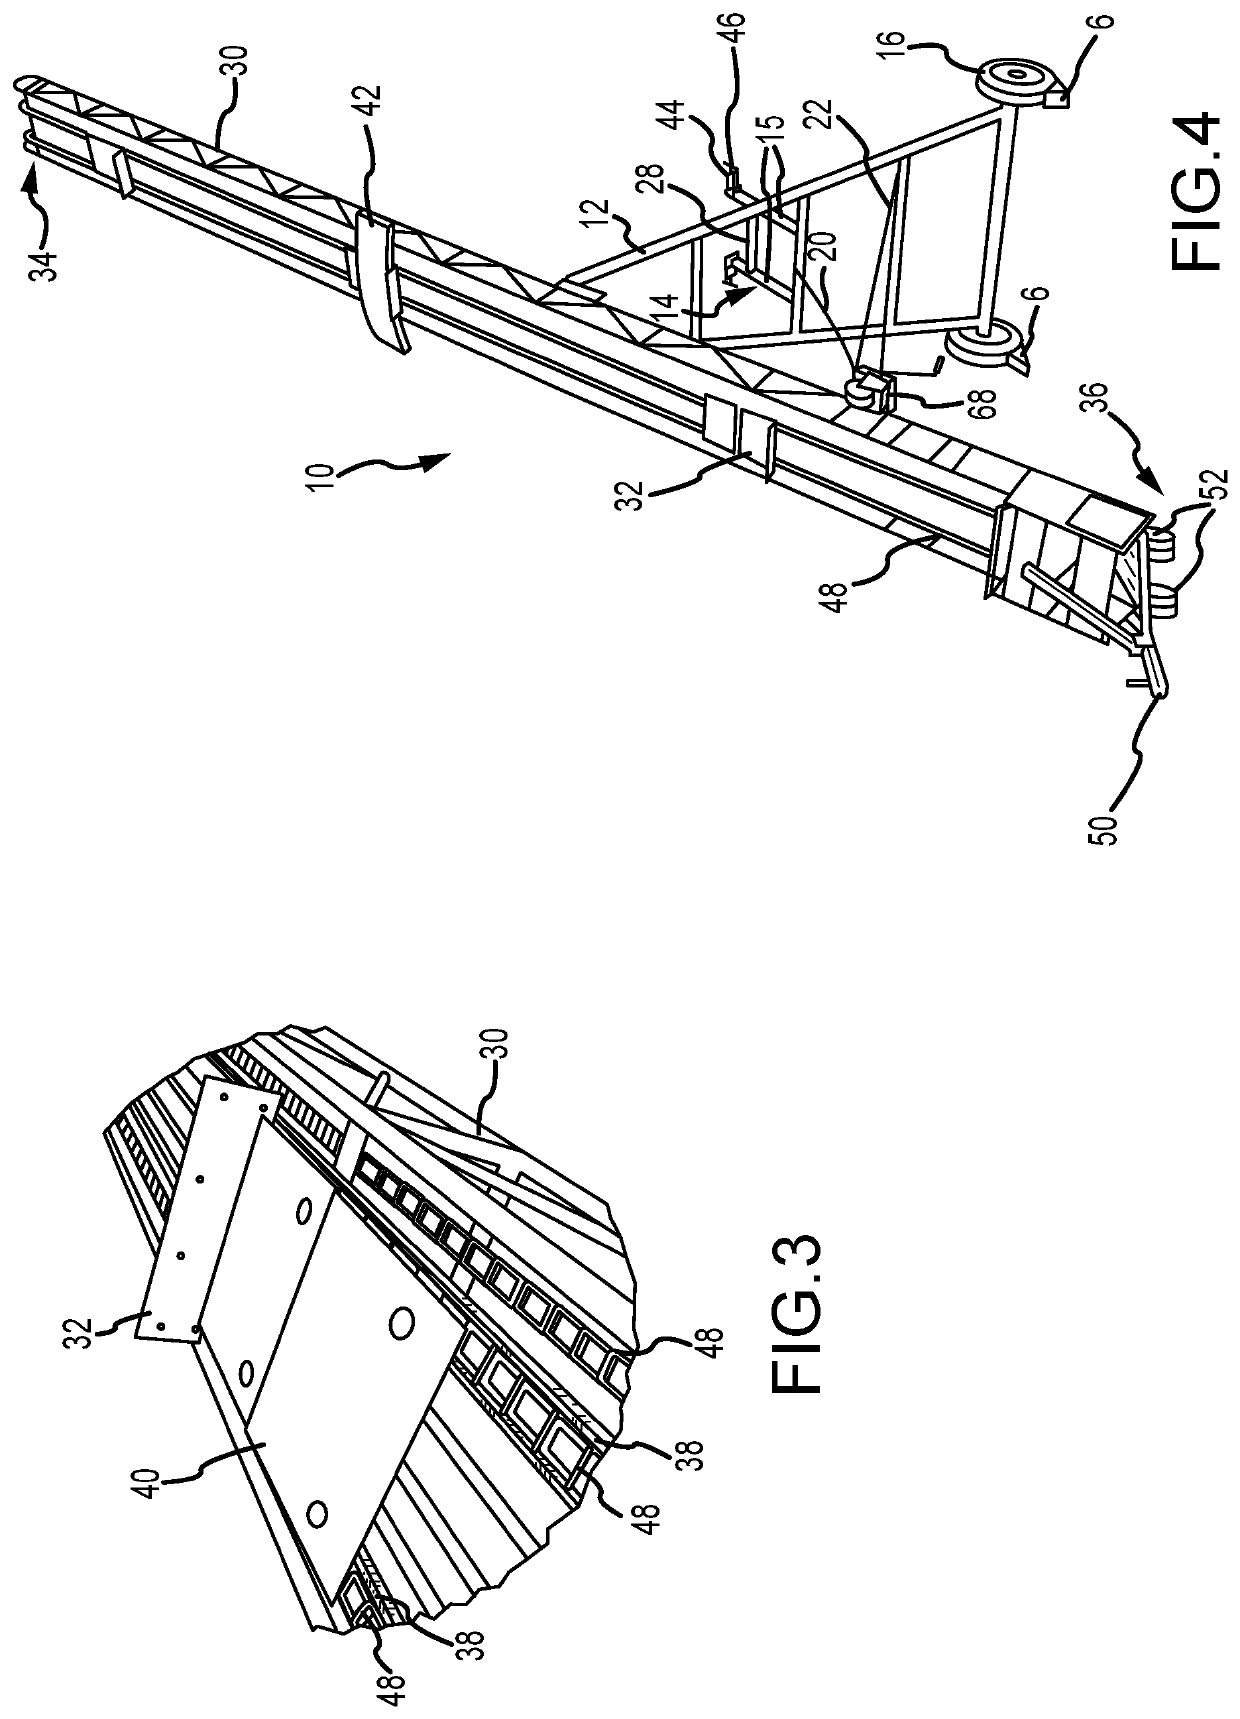 Conveyor with towable elevating carriage